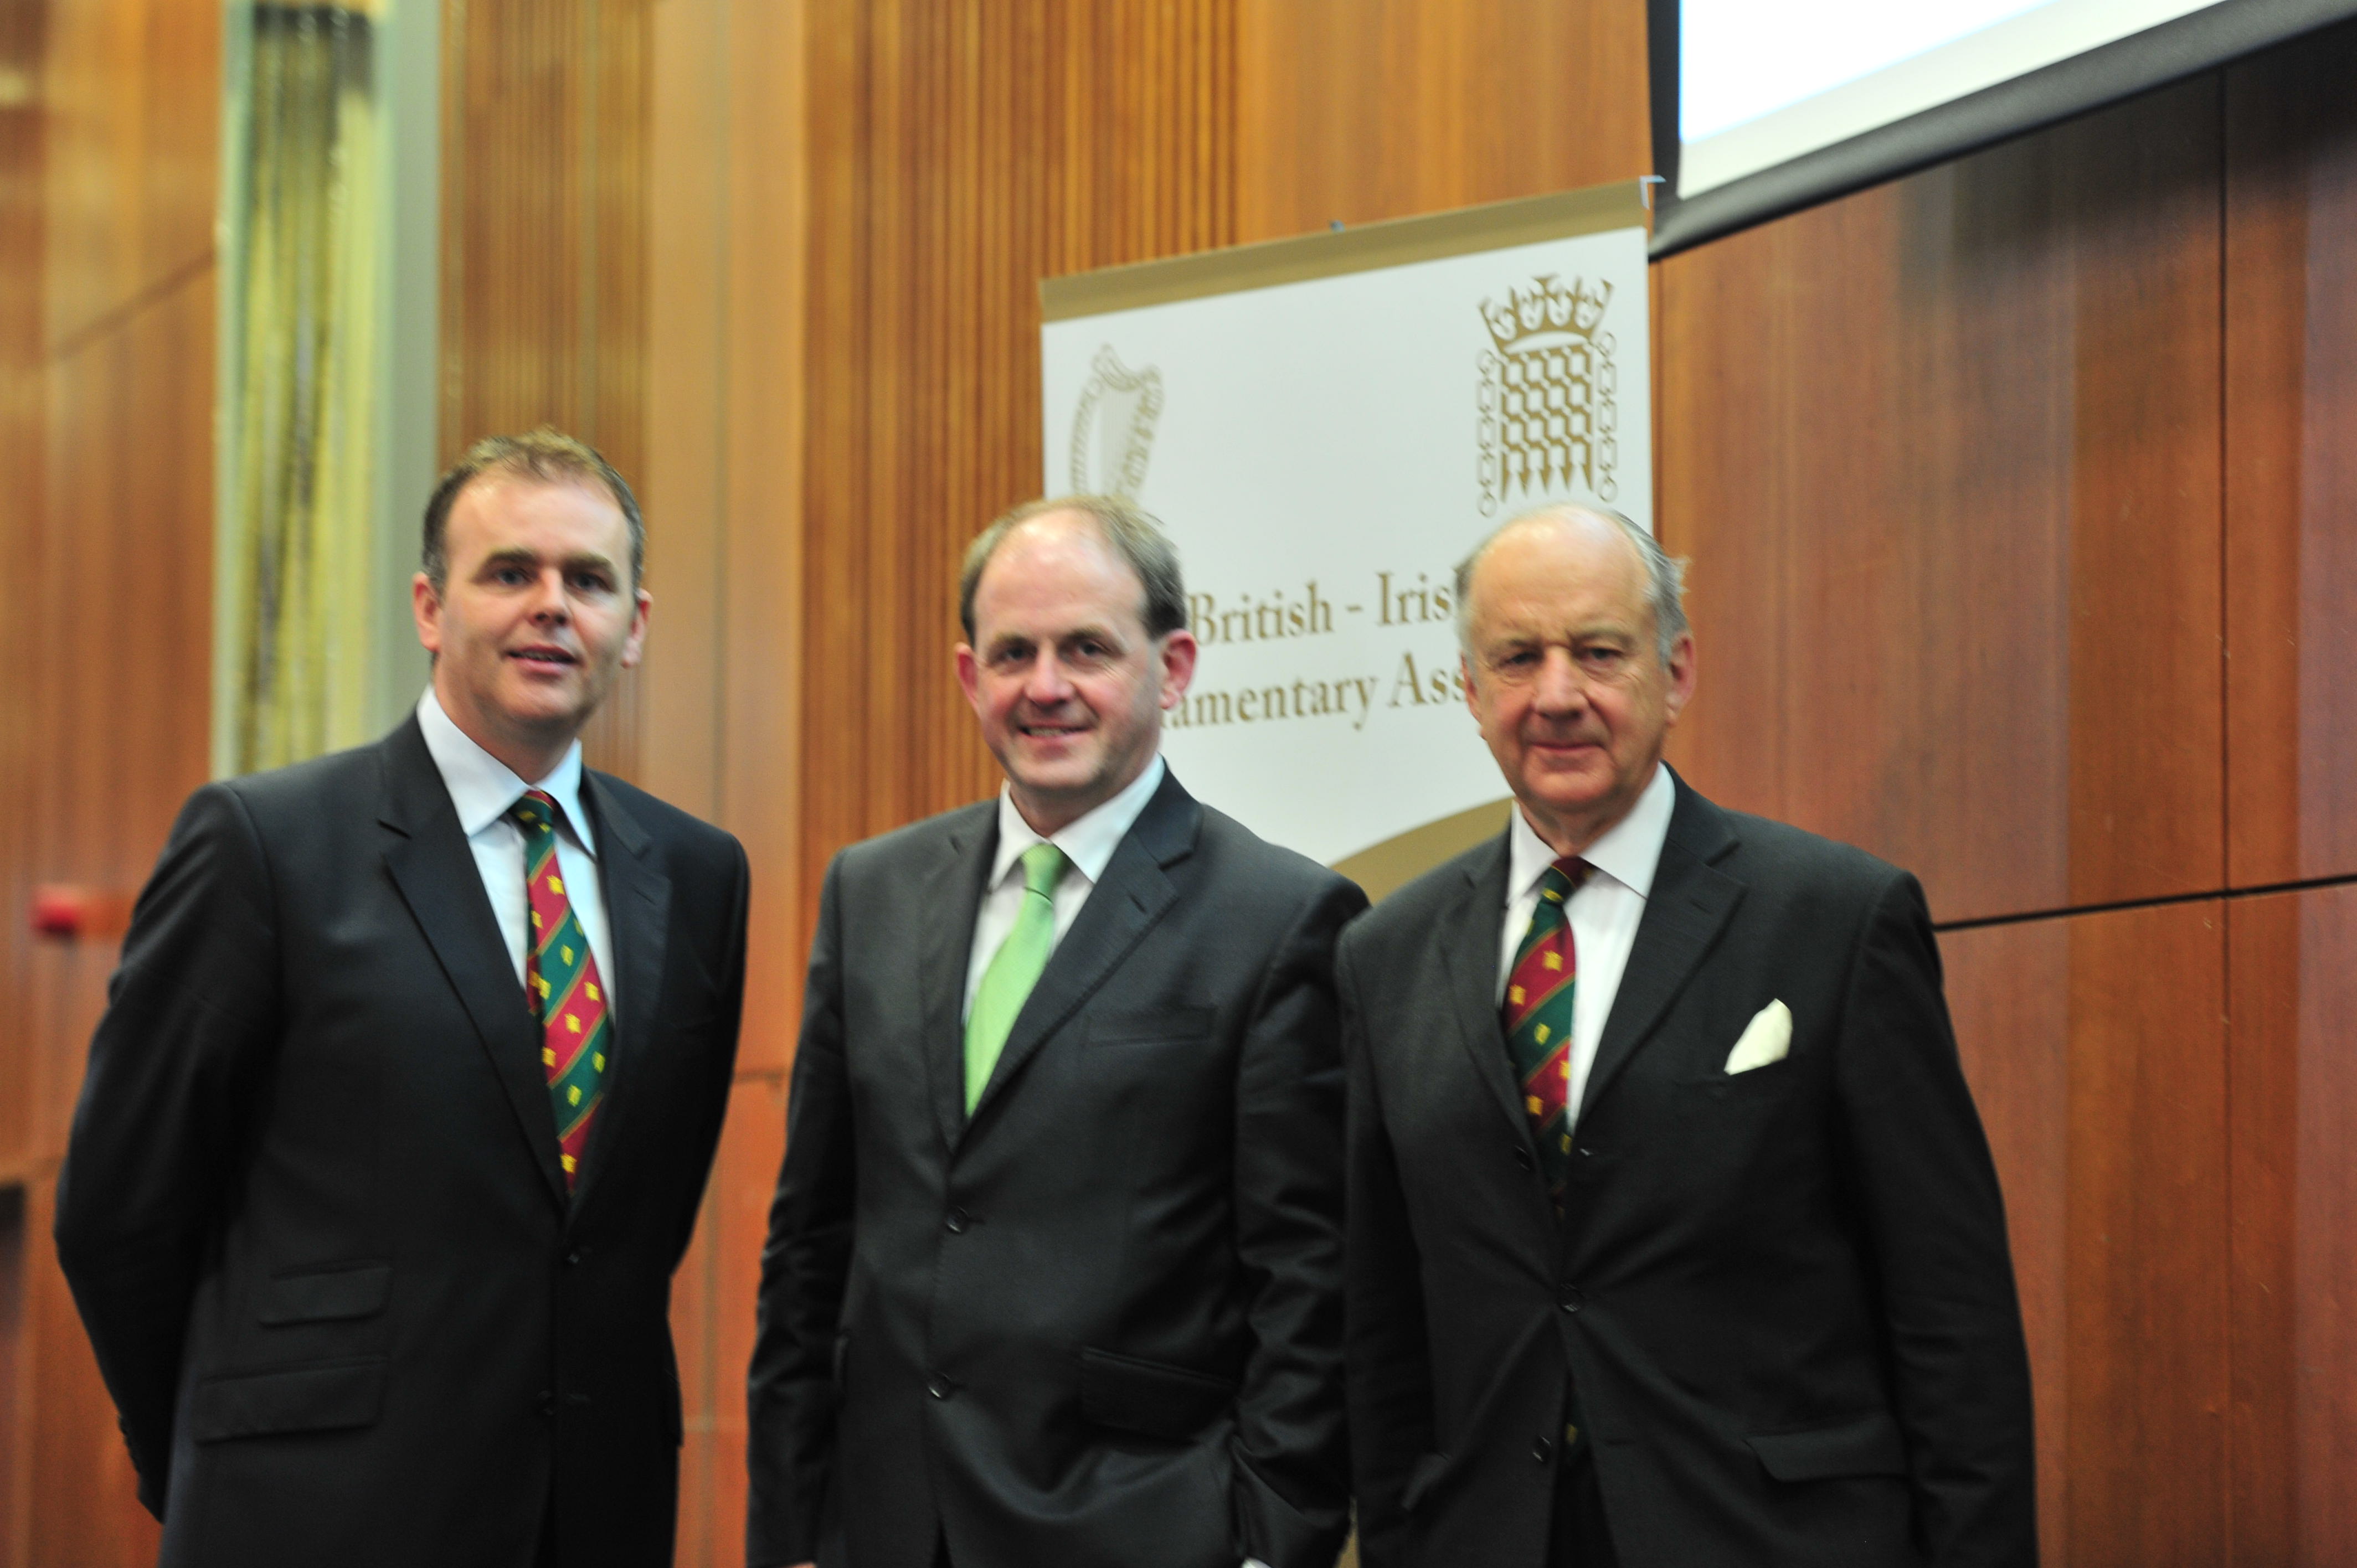 CEO of Enterprise Ireland, Frank Ryan,with the Co-Chairmen at the 42nd plenary in Cork